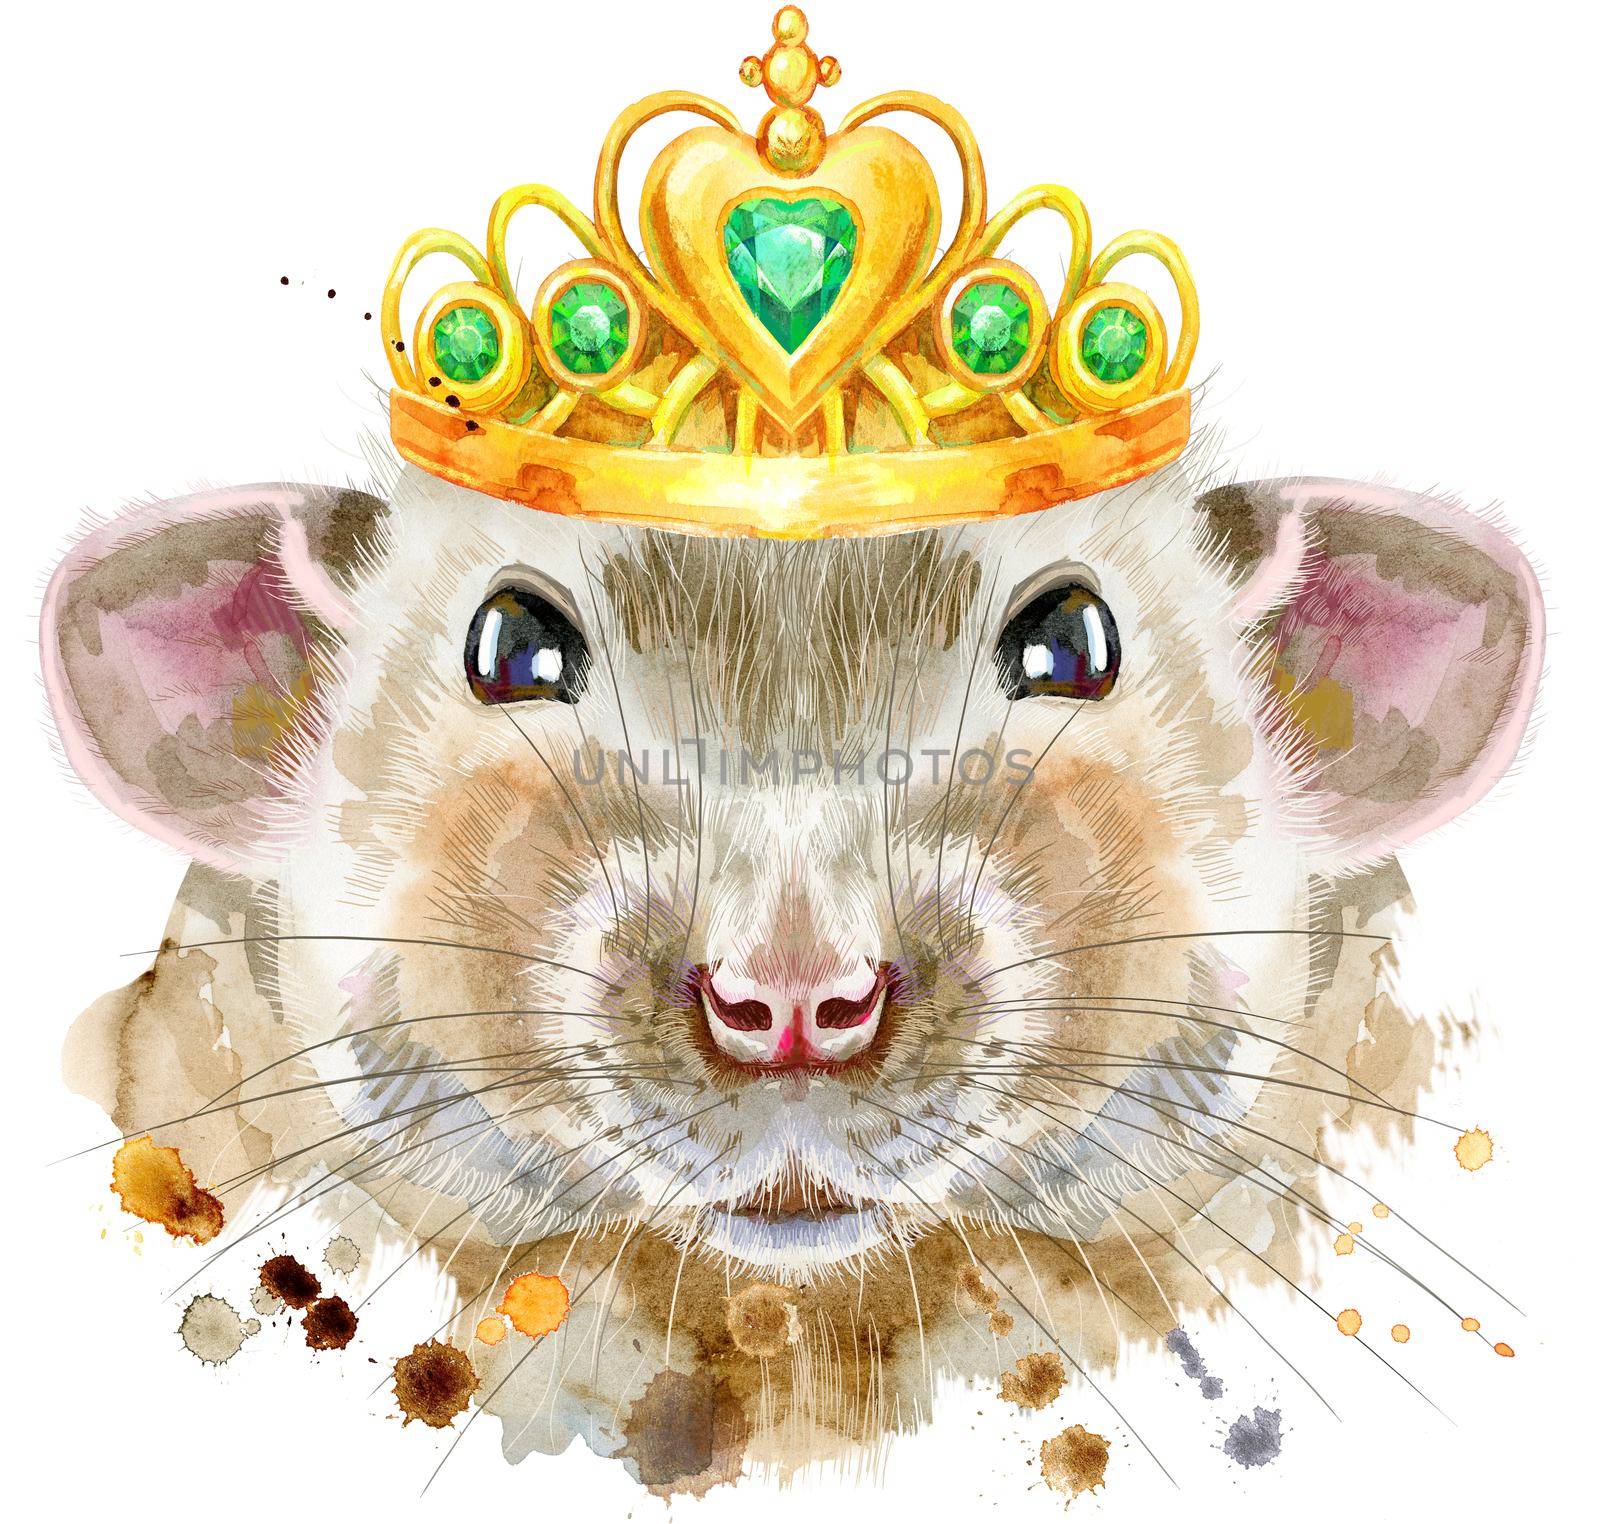 Watercolor portrait of rat with golden crown by NataOmsk